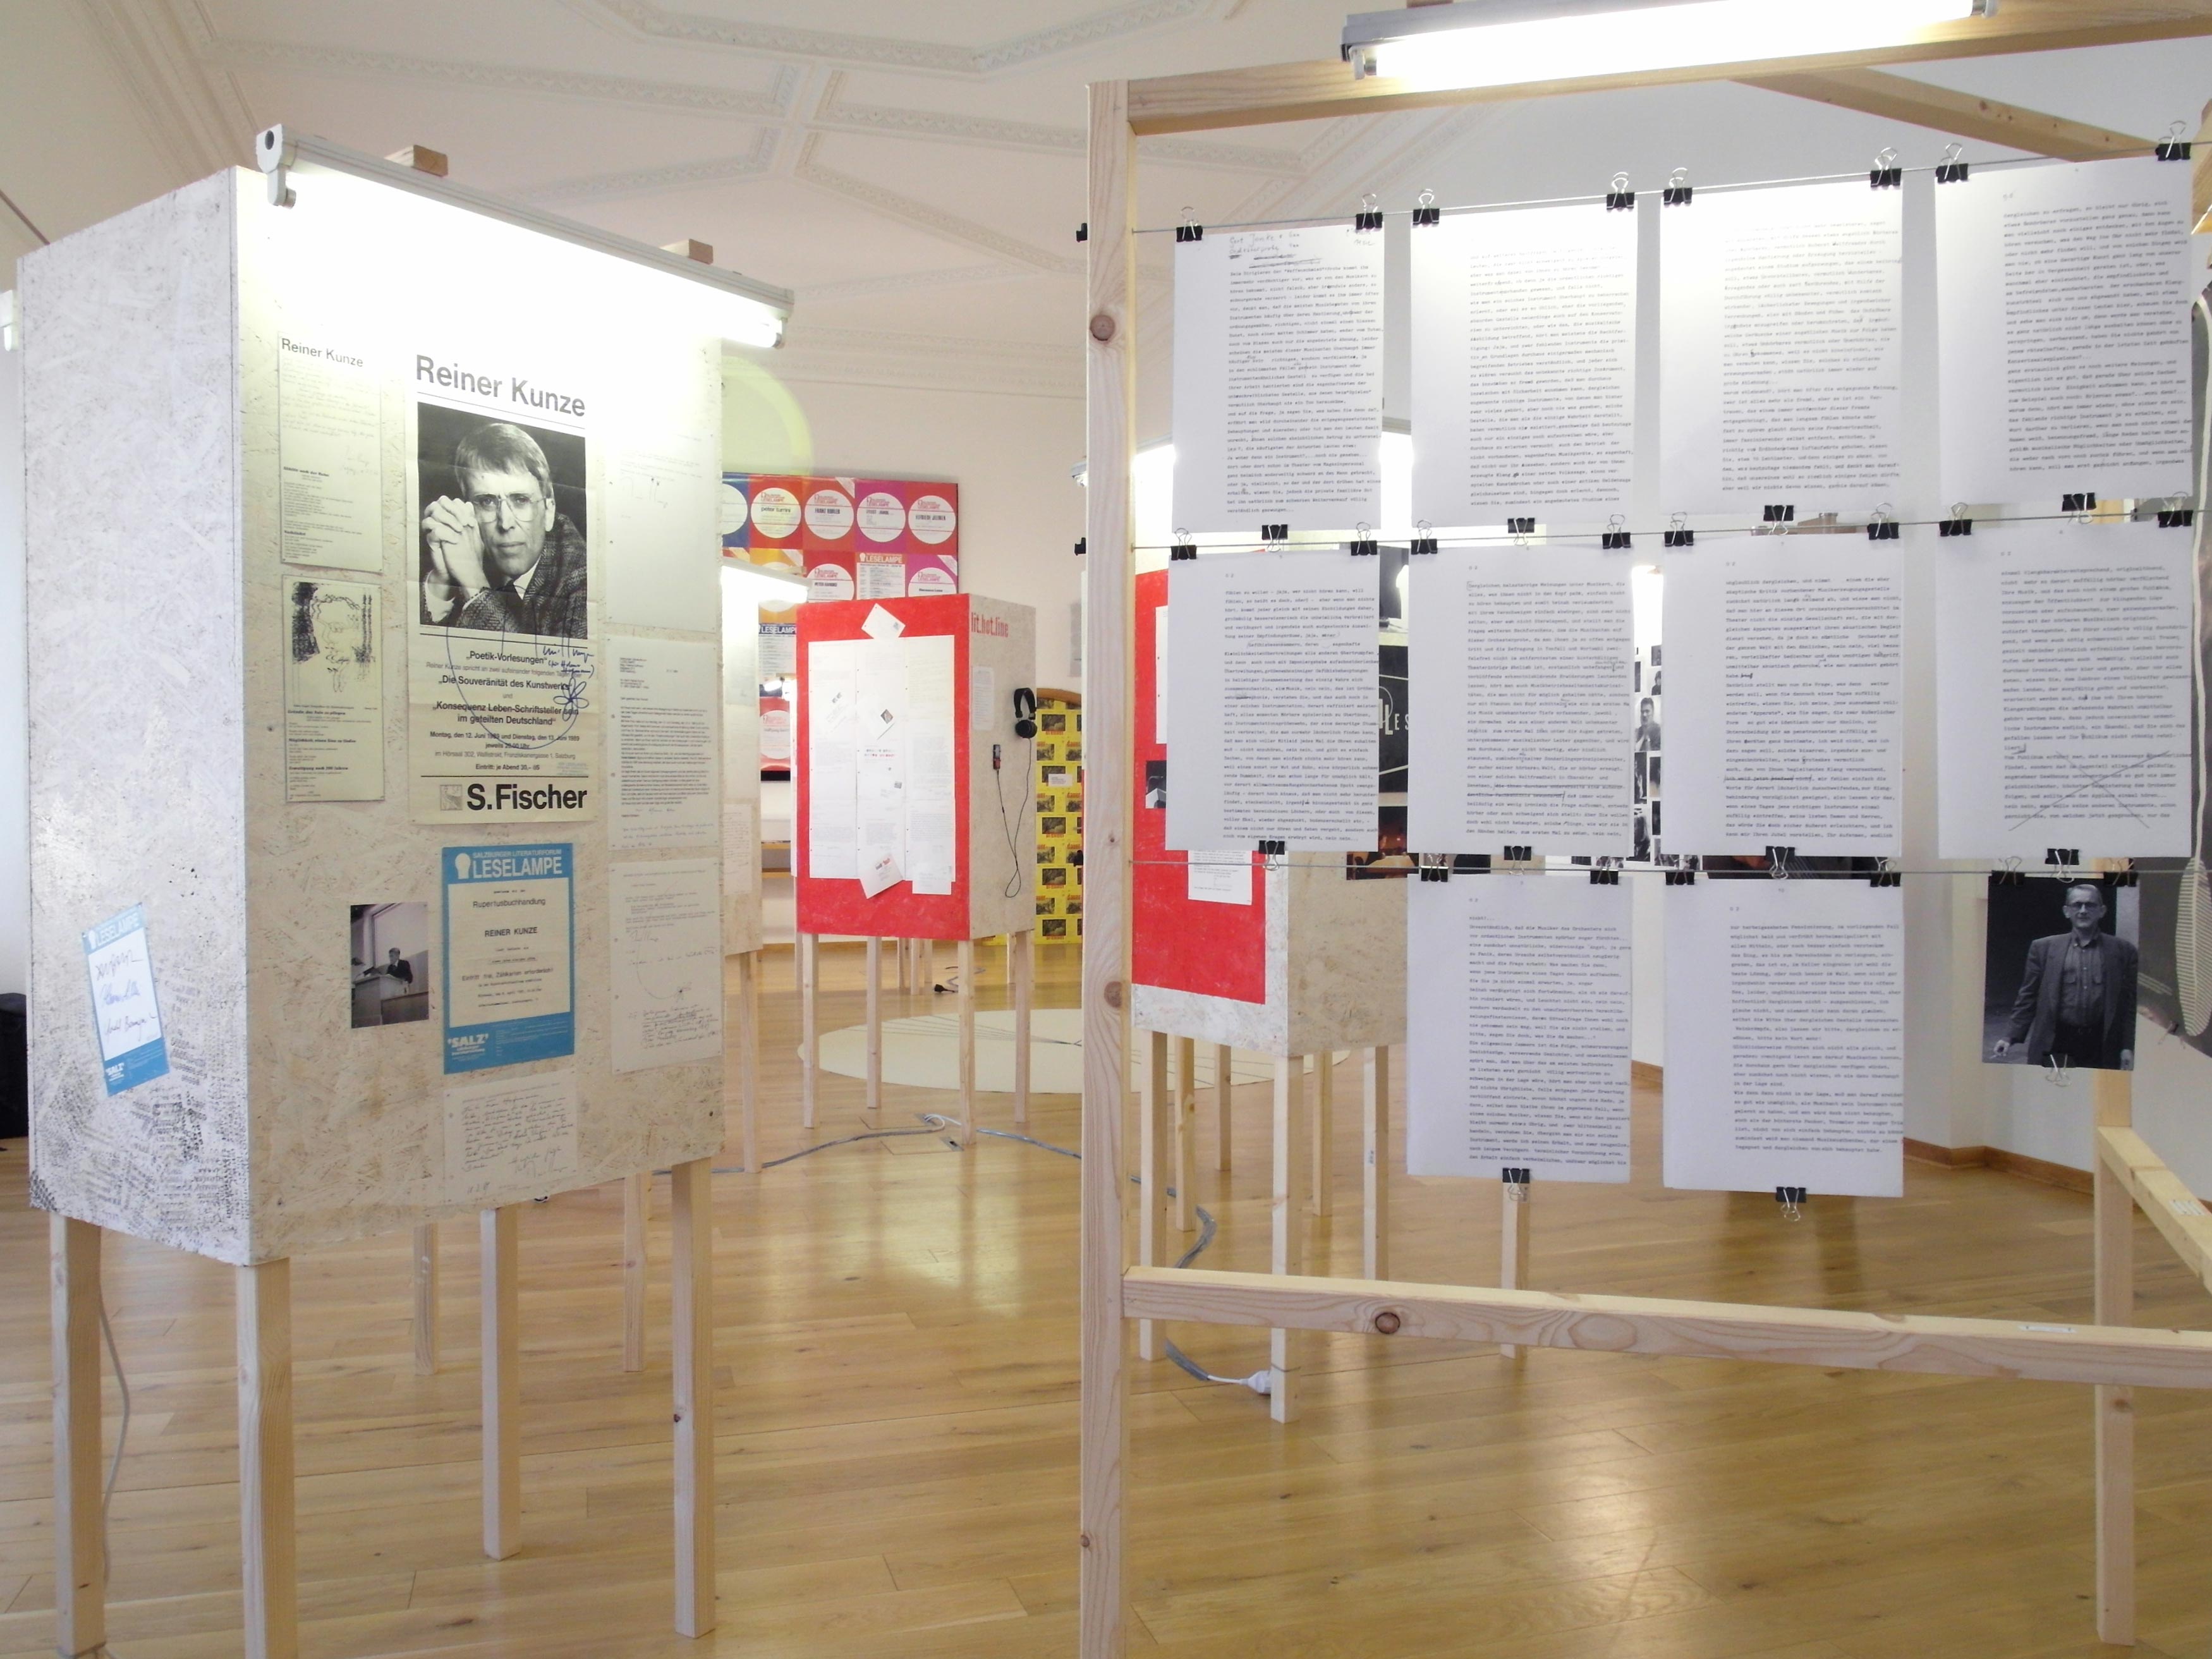 Room with several wooden cuboids mounted on 4 squared timber. Sheets of paper with texts and images are mounted on the cuboids. Inside a wooden frame metal cords are stretched. Sheets of paper with text are clipped to the cord.